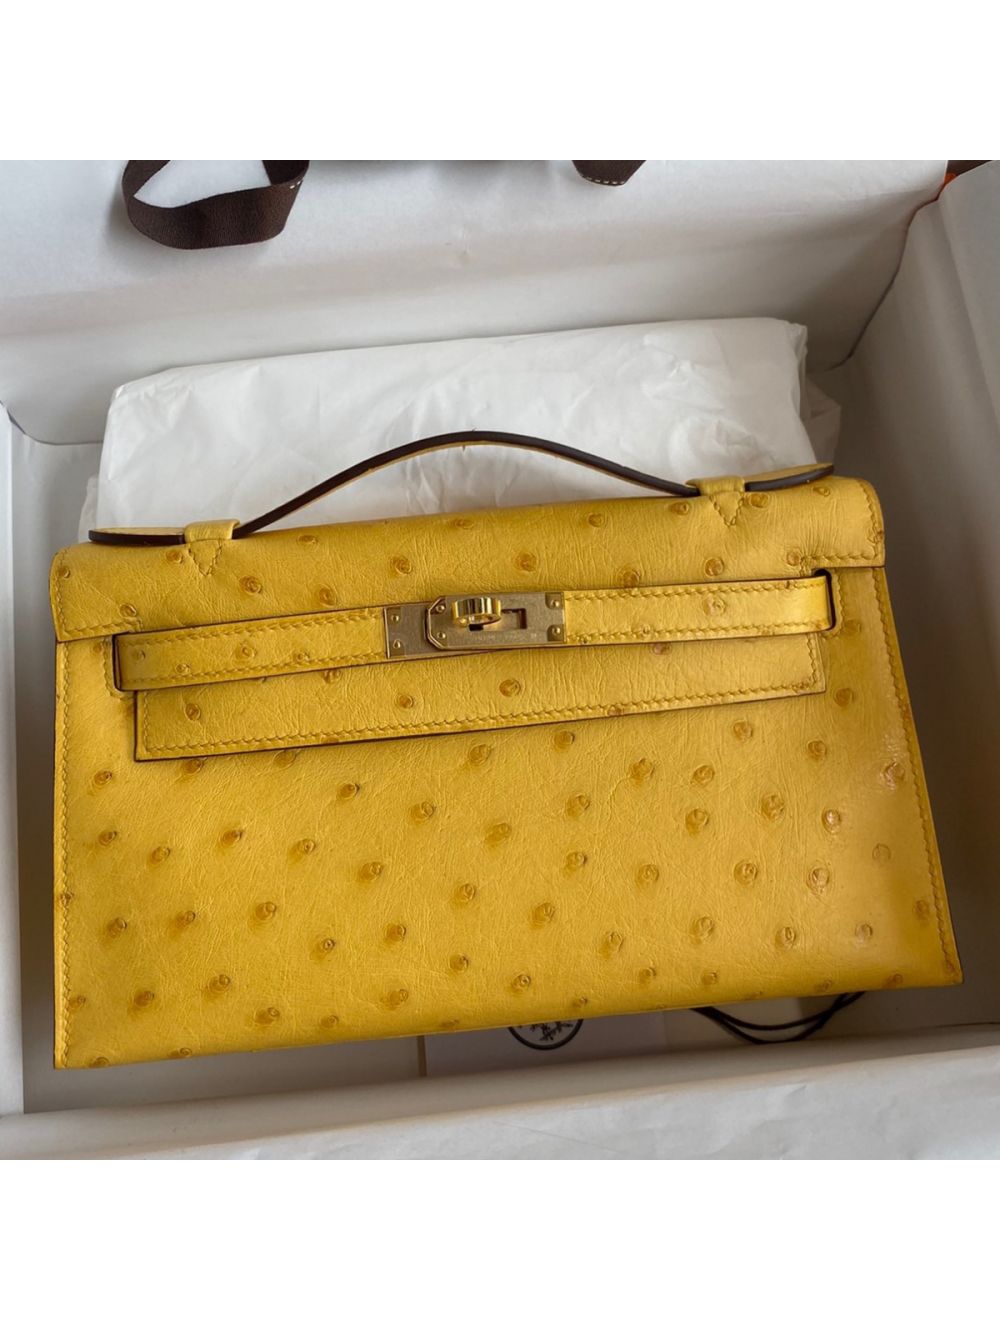 Replica Hermes Mini Lindy Handmade Bag In Gold Ostrich Leather